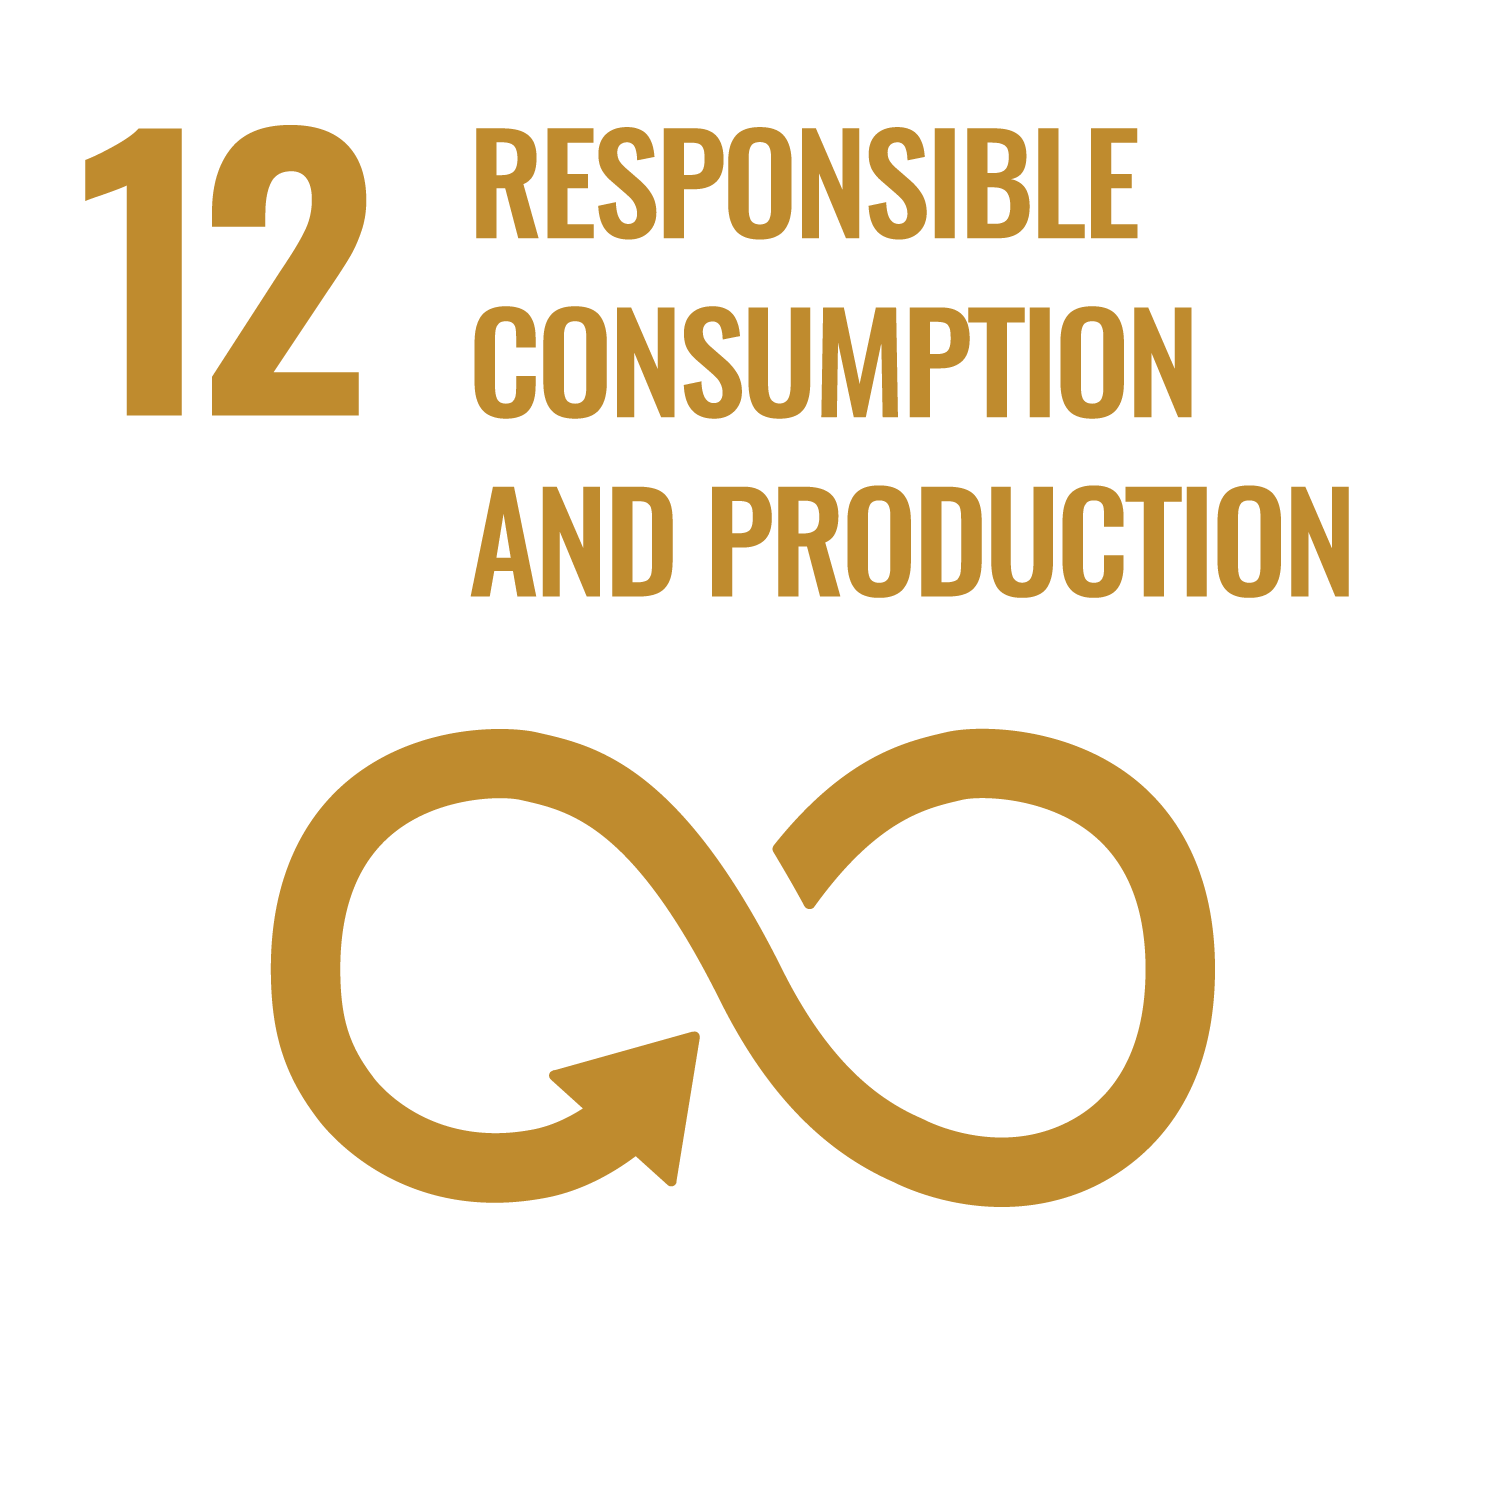 Sdg 12 Responsible Consumption And Production The Schneider Group 4577